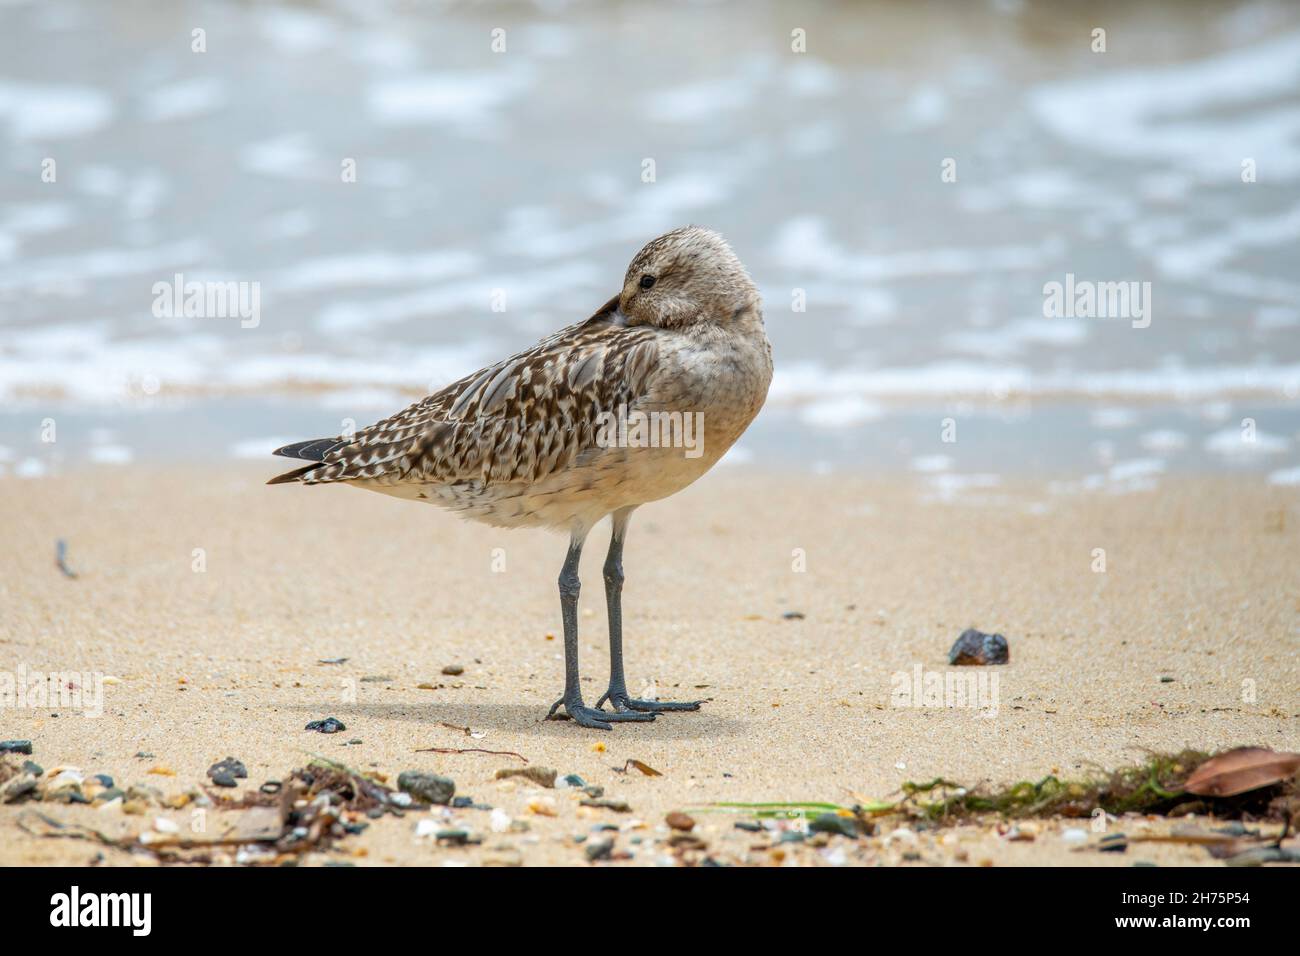 Bar-tailed Godwit  Limosa lapponica Cains, Queensland, Australia 31 October 2019       Adult in winter plumage.       Scolopacidae Stock Photo